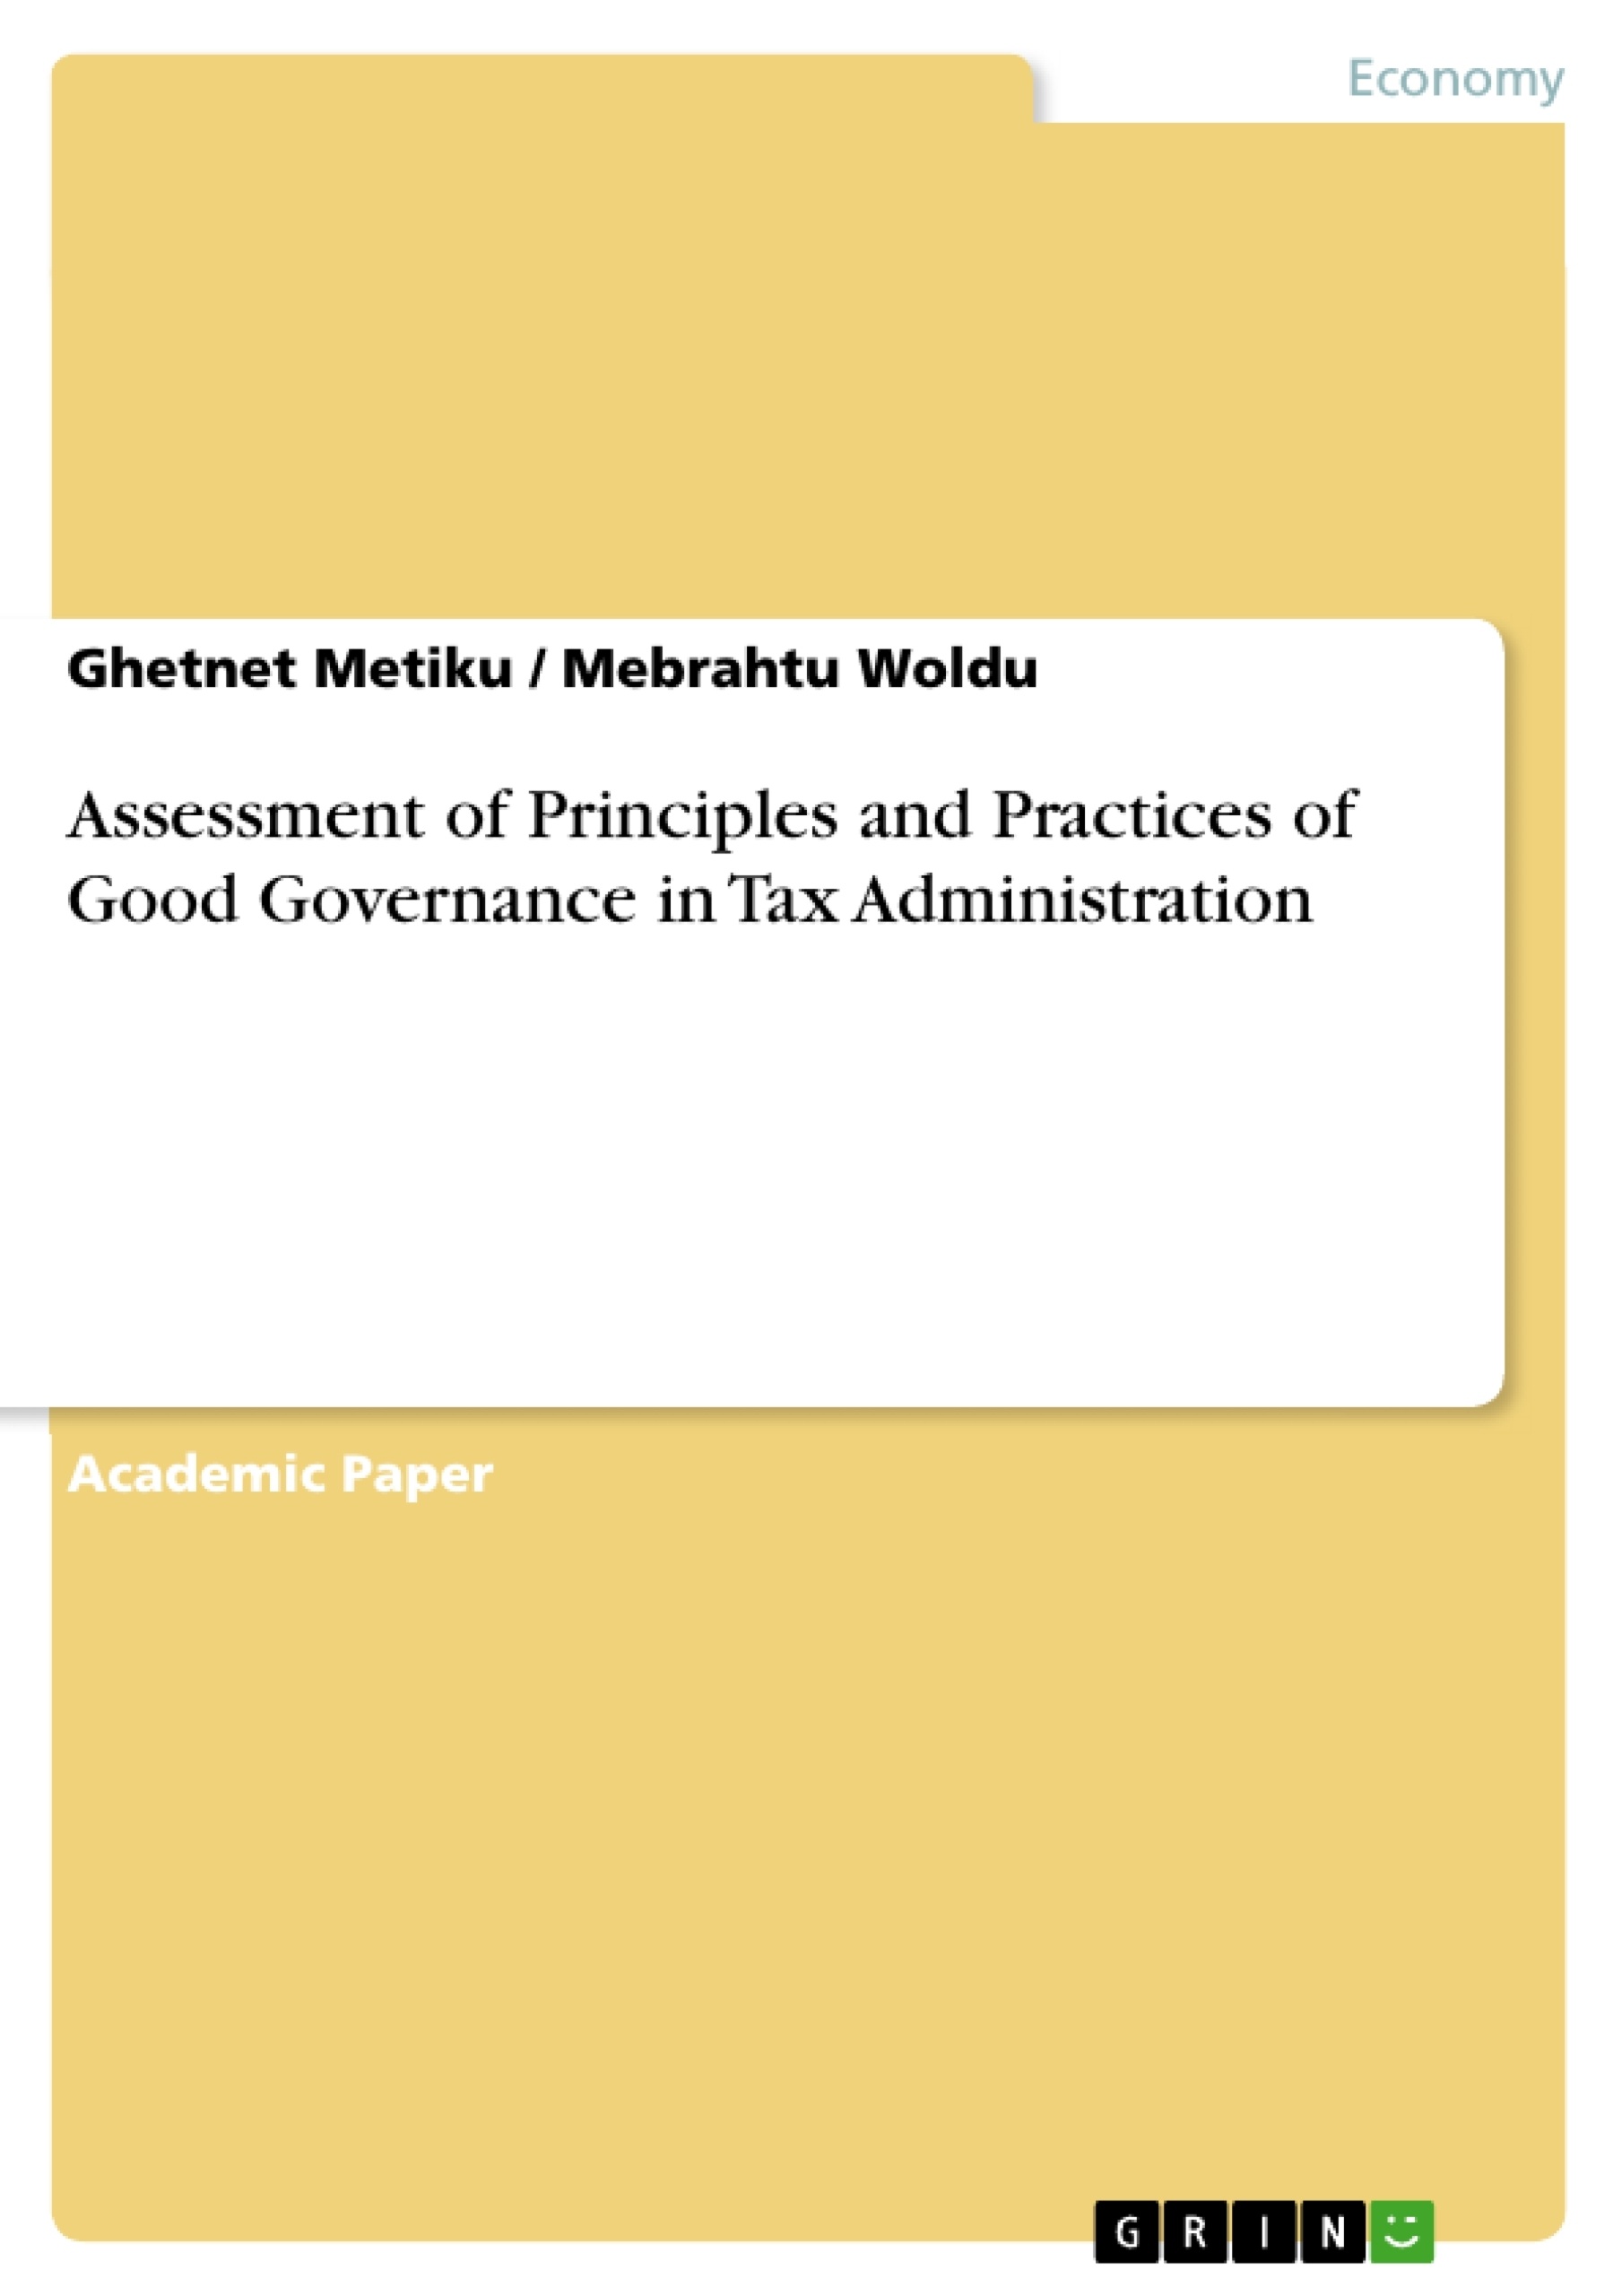 Título: Assessment of Principles and Practices of Good Governance in Tax Administration